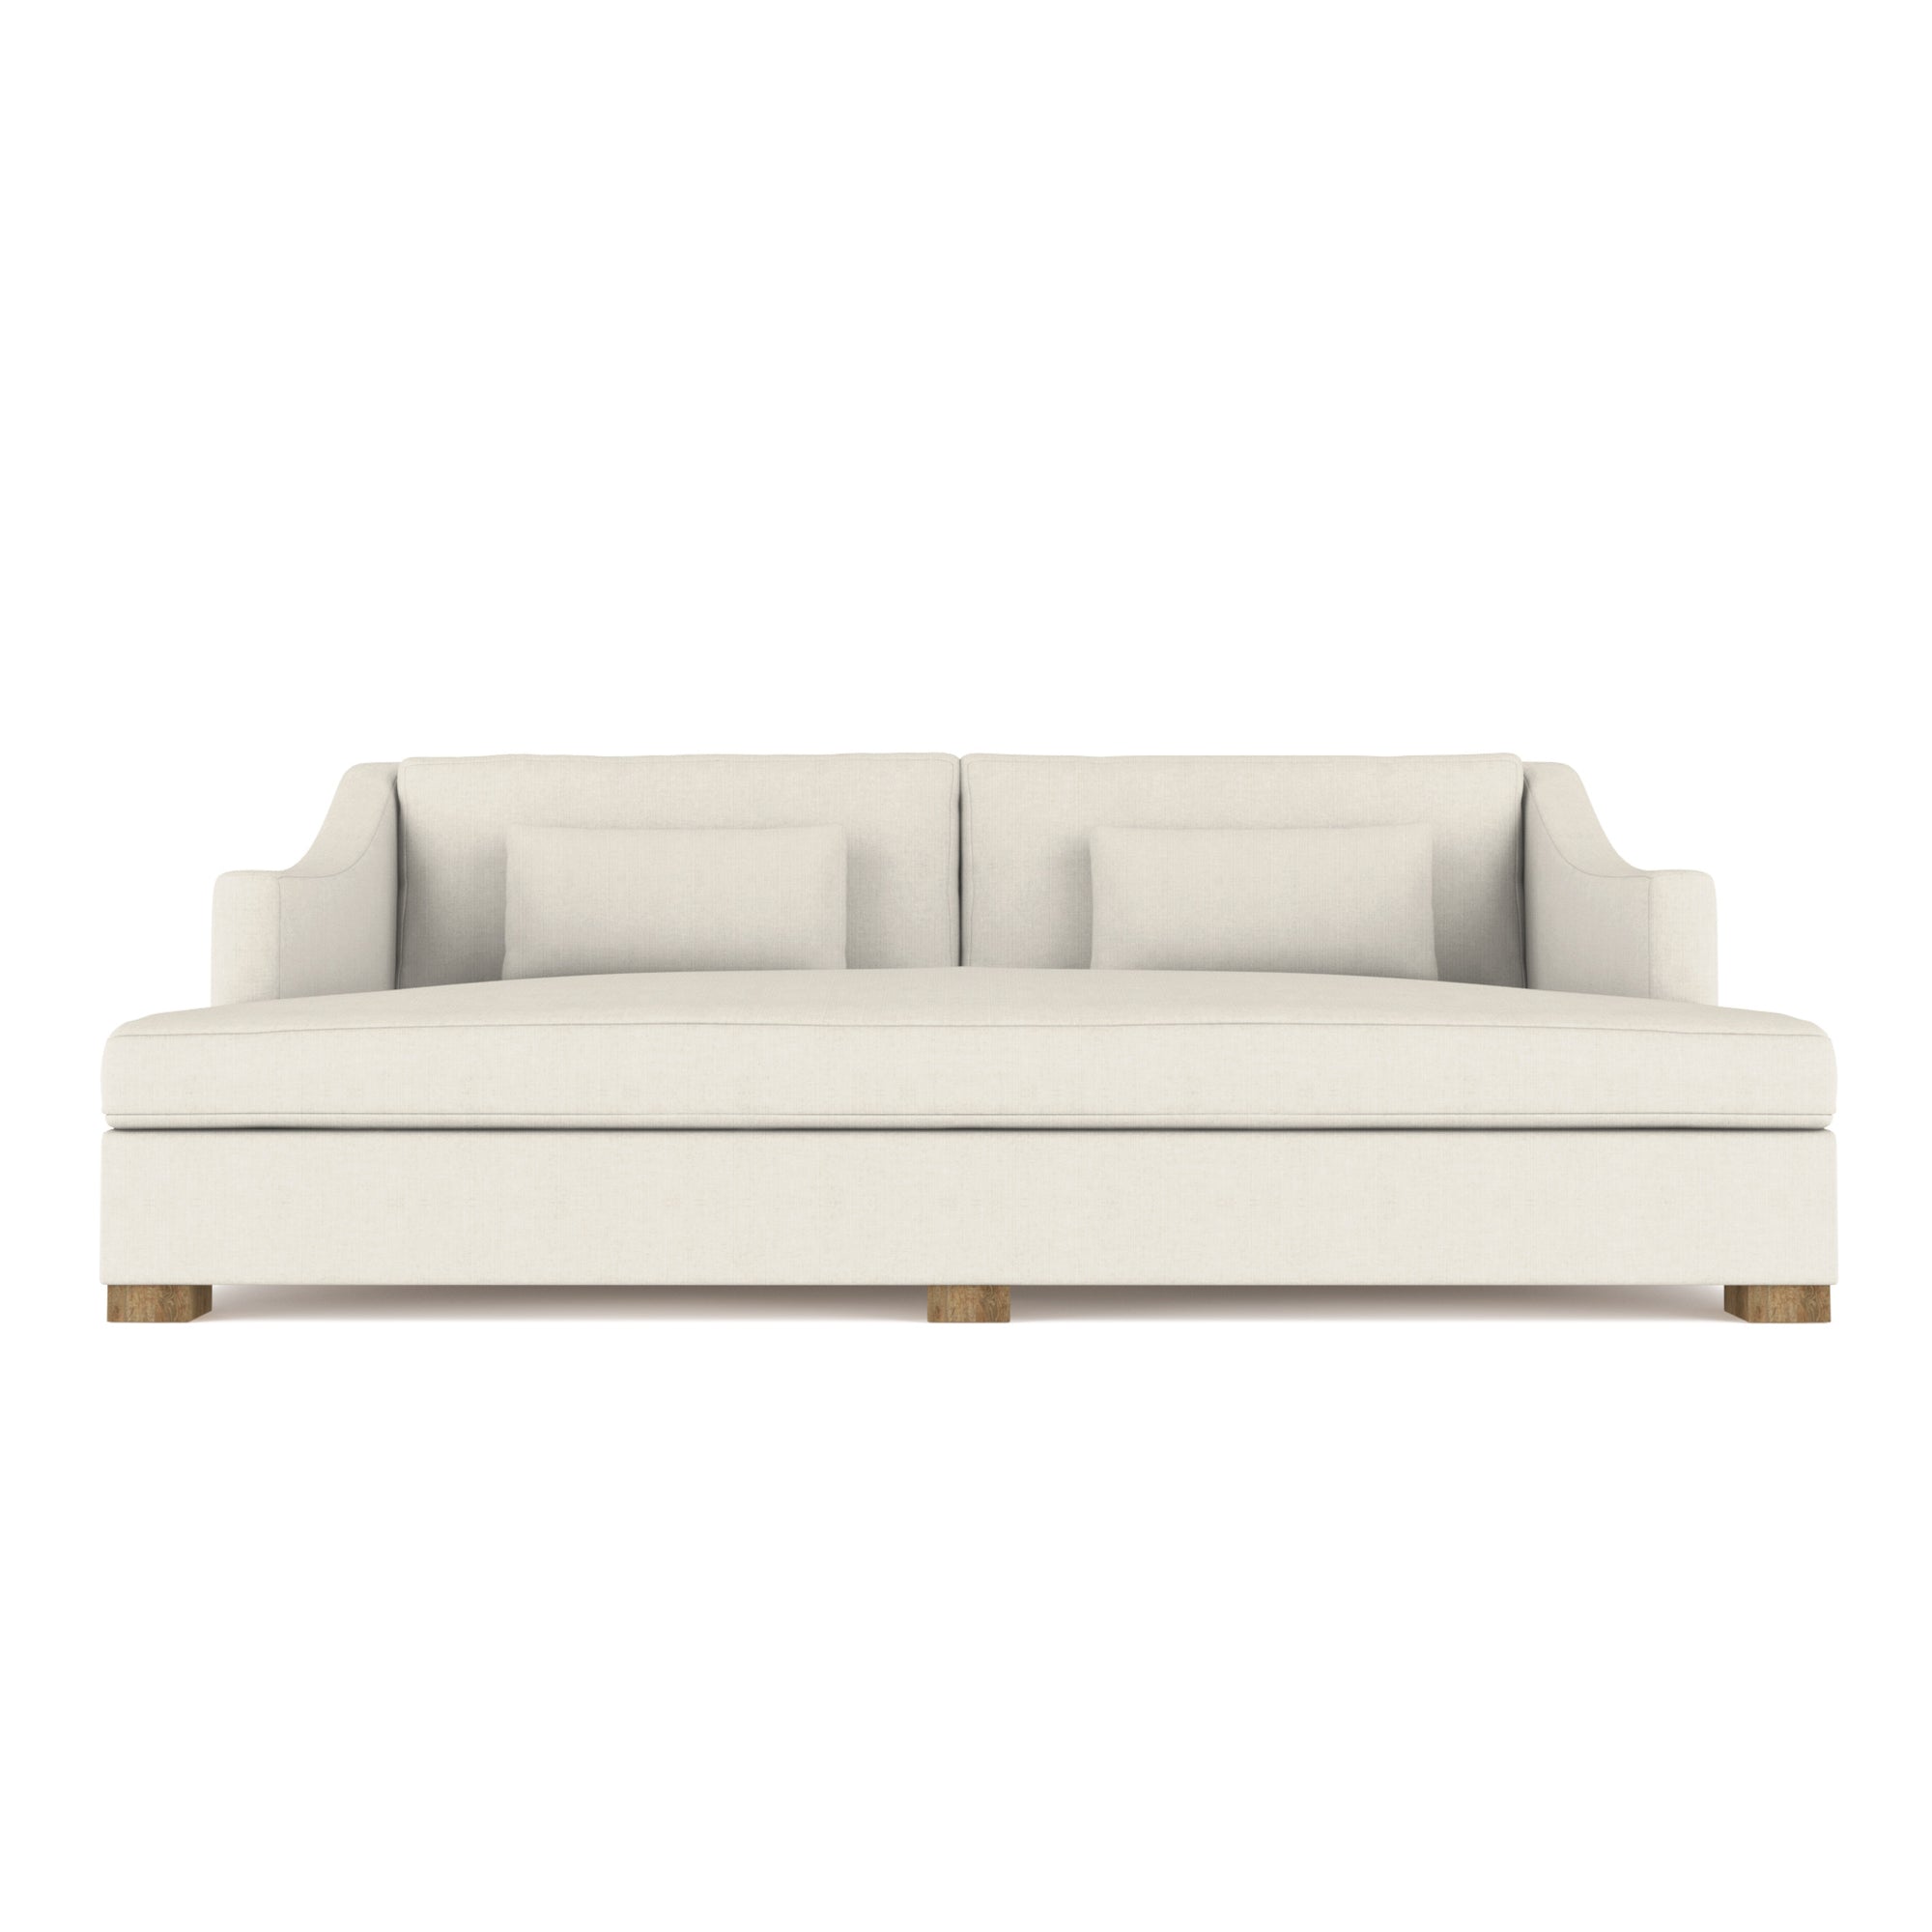 Crosby Daybed - Alabaster Box Weave Linen